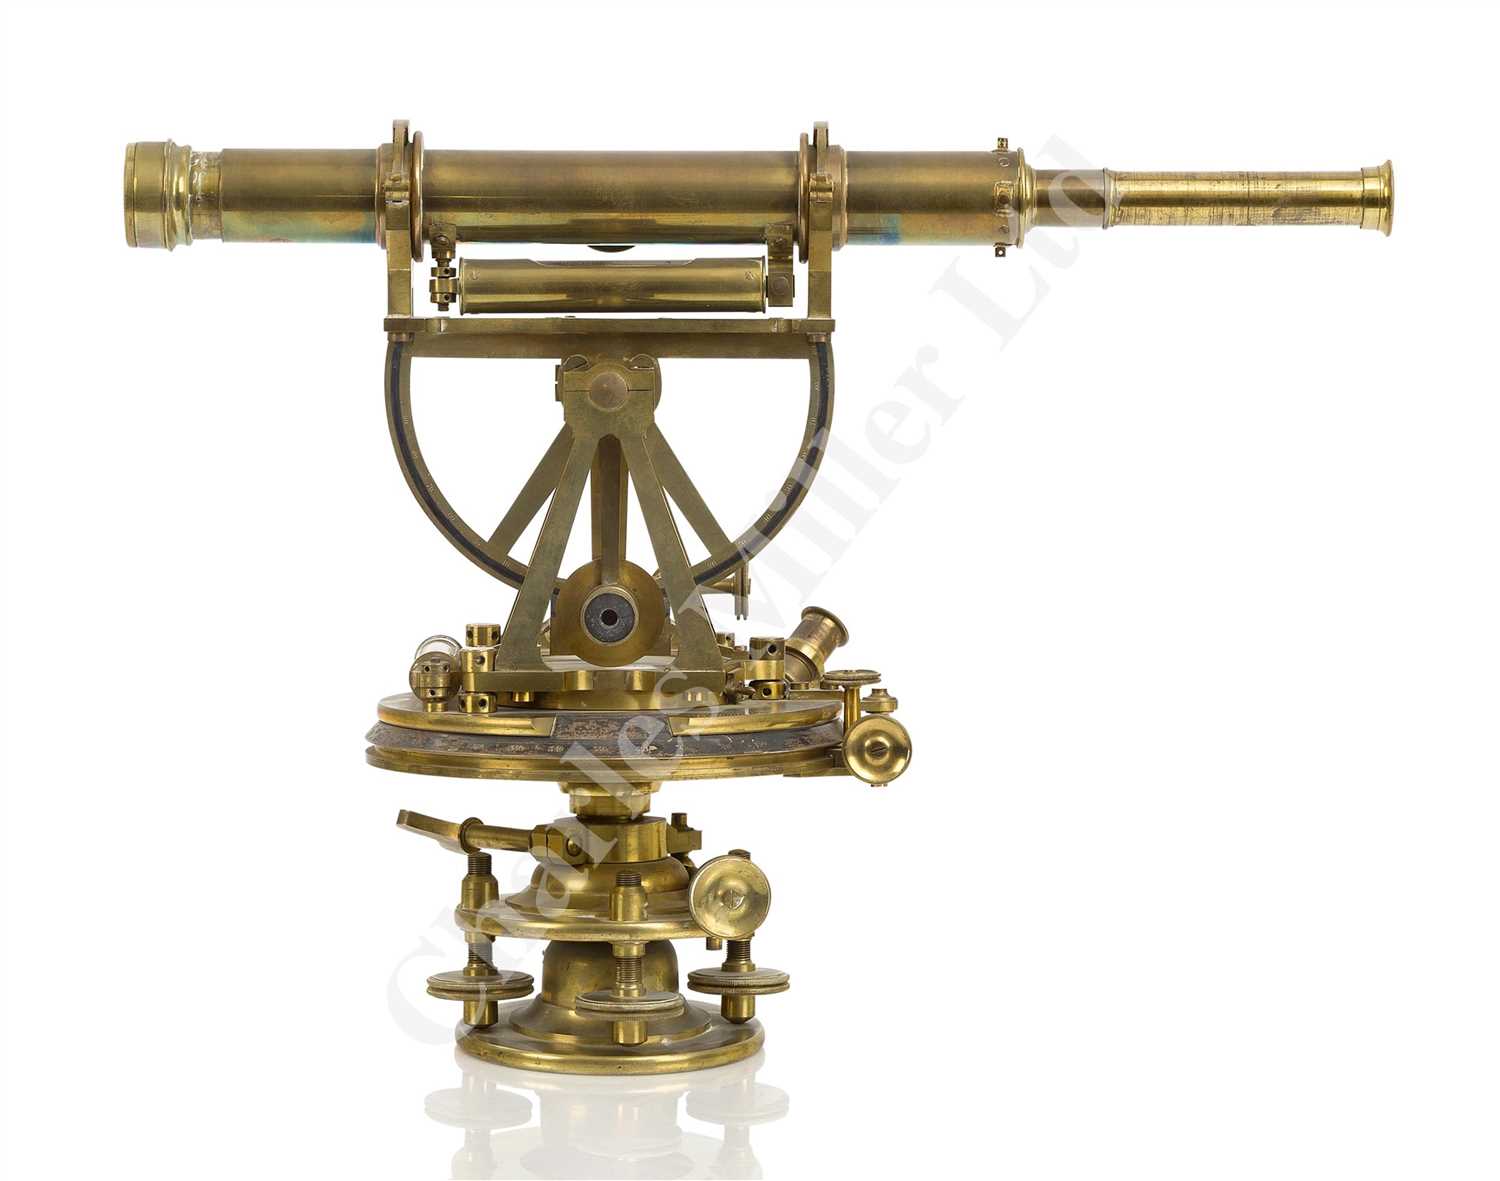 Lot 273 - A SURVEYING THEODOLITE BY TROUGHTON & SIMMS, LONDON, CIRCA 1820